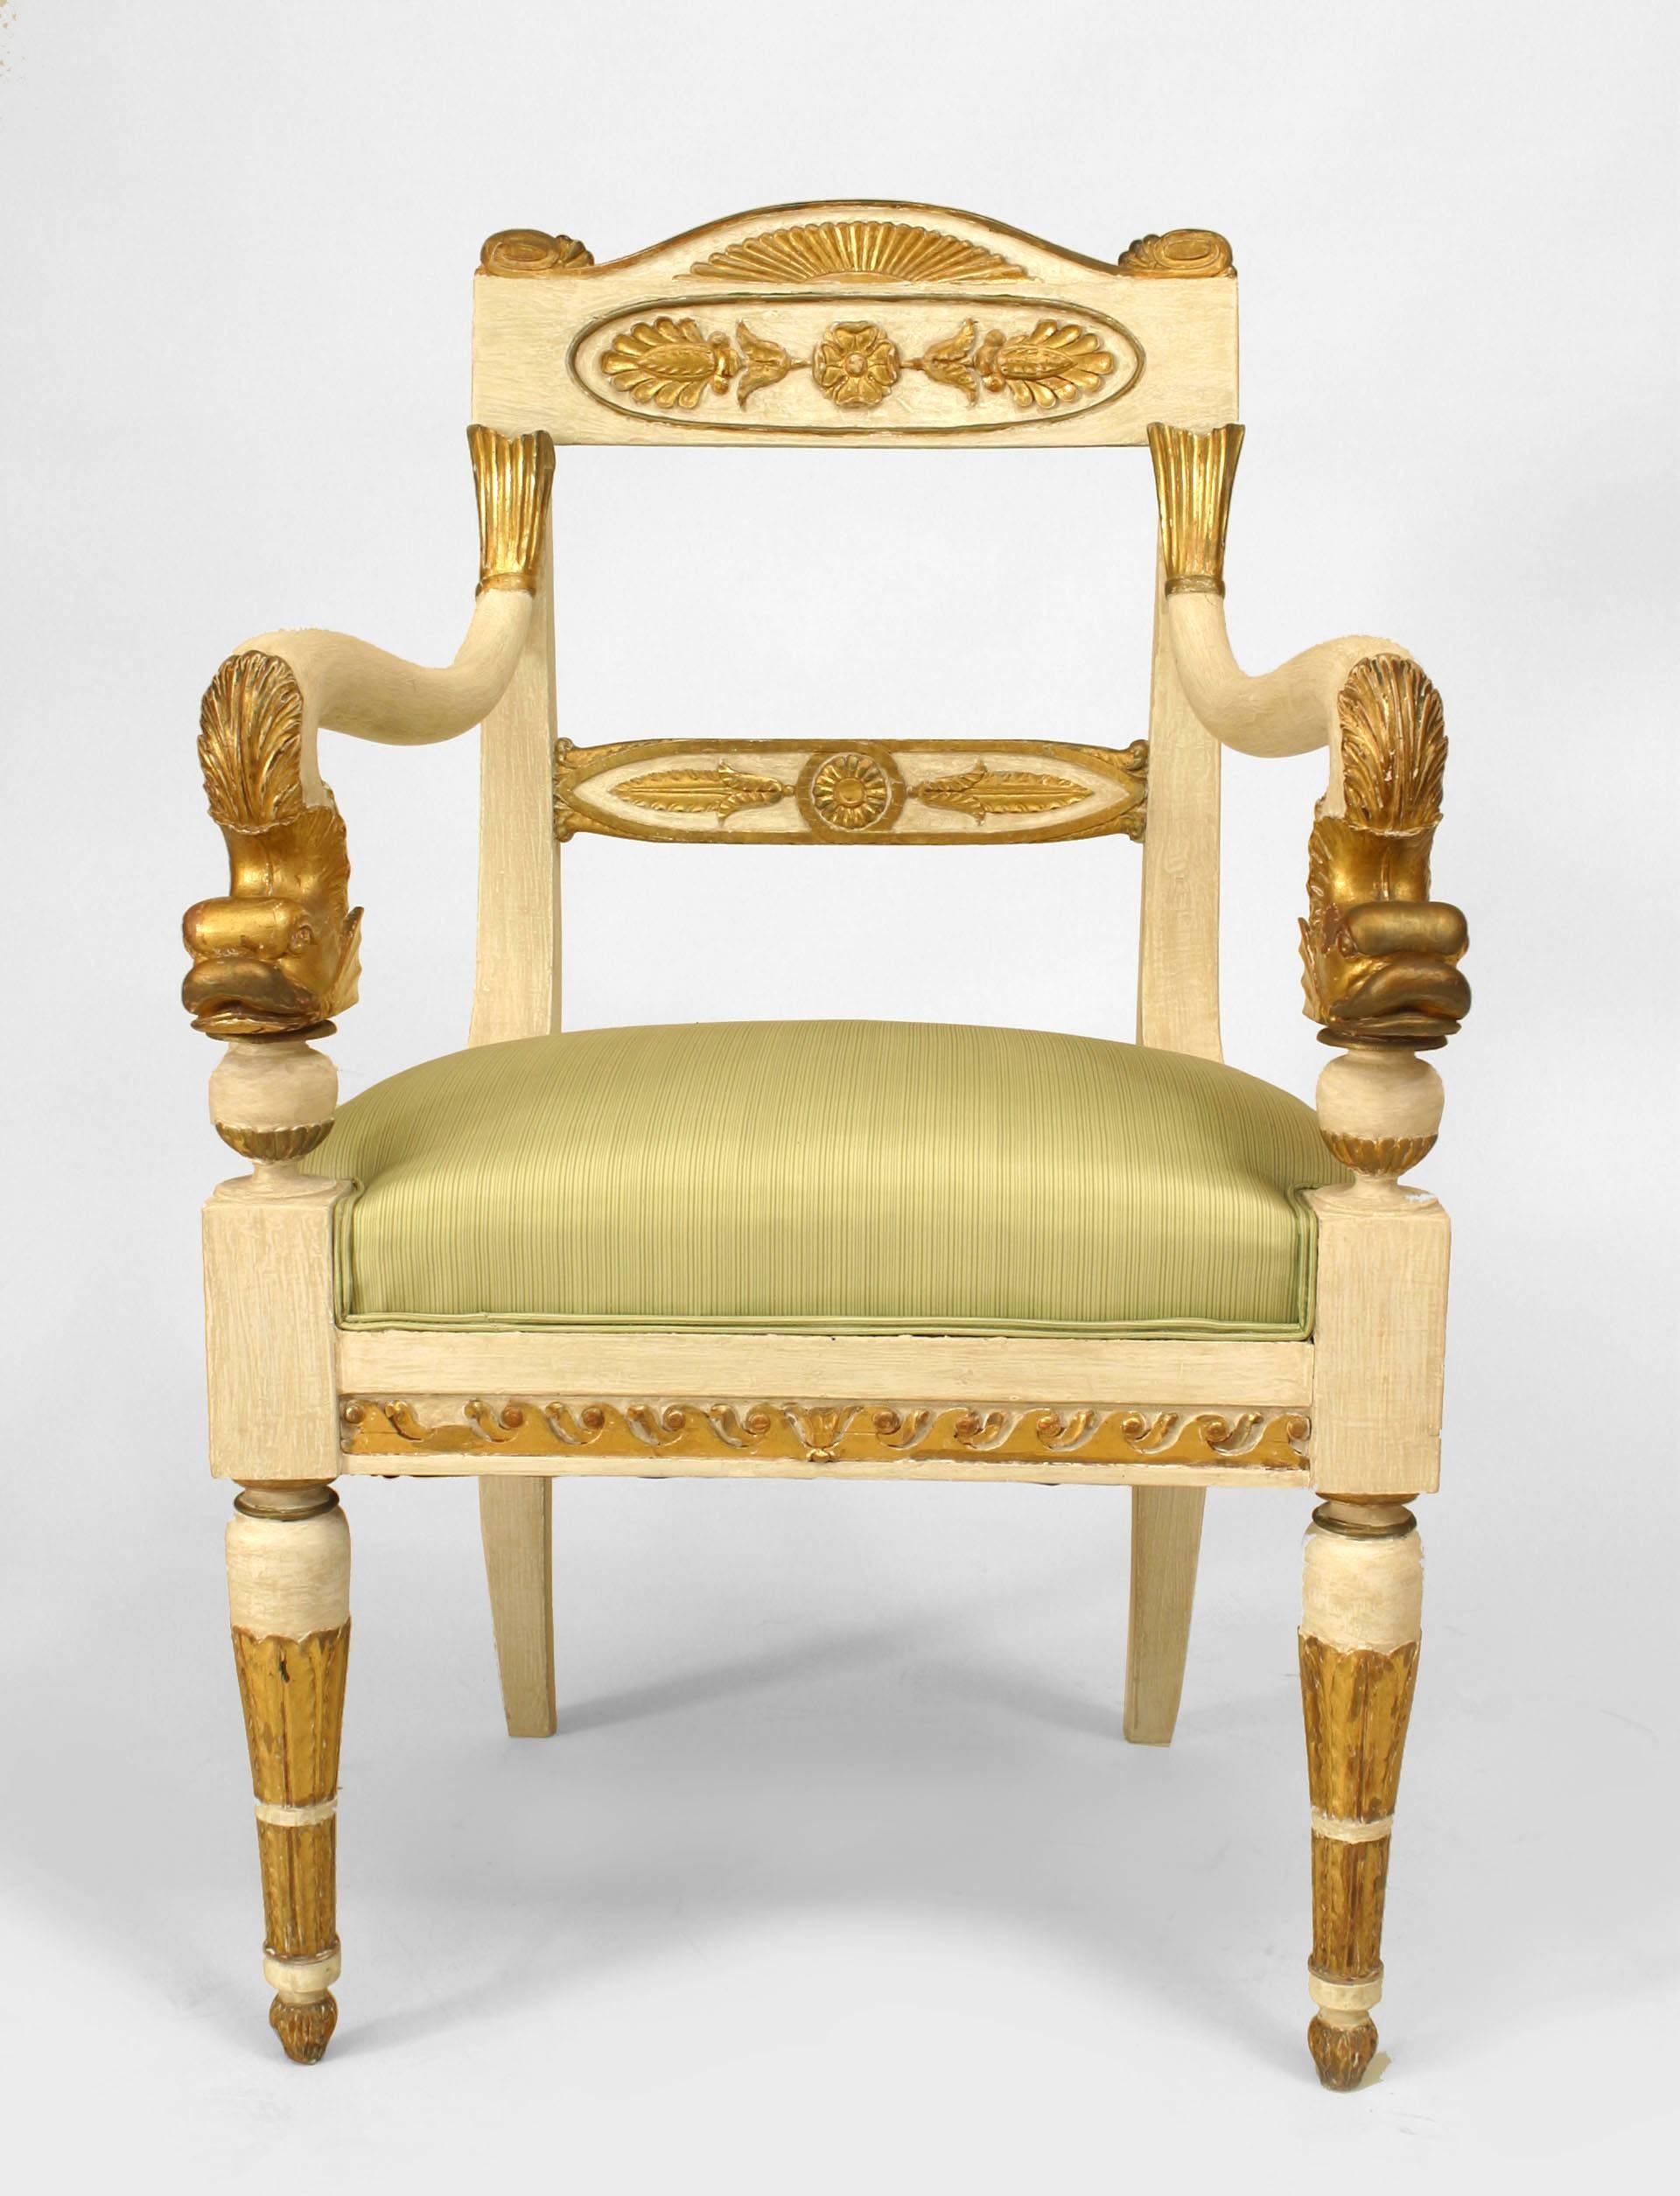 Dating to the first quarter of the nineteenth century, this pair of painted Italian Neoclassic arm chairs features seats upholstered in lime green fabric in addition to decorative gilt carving and trim, most notably prominent dolphin-form arms.